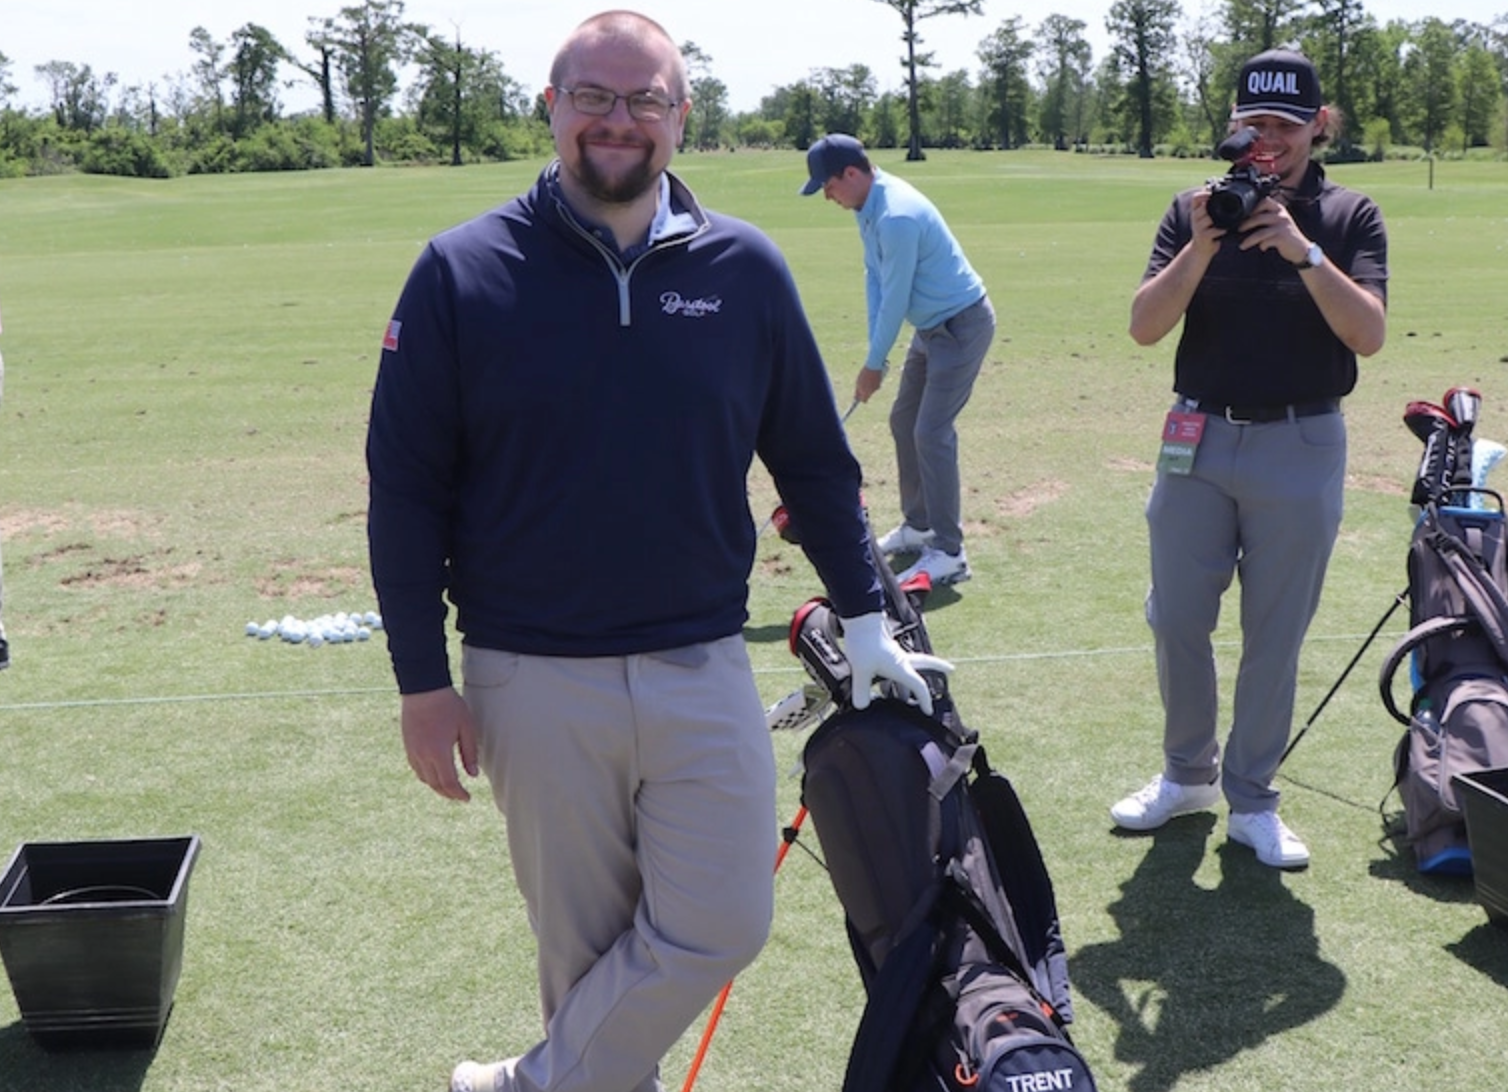 Photos from the 2022 Zurich Classic